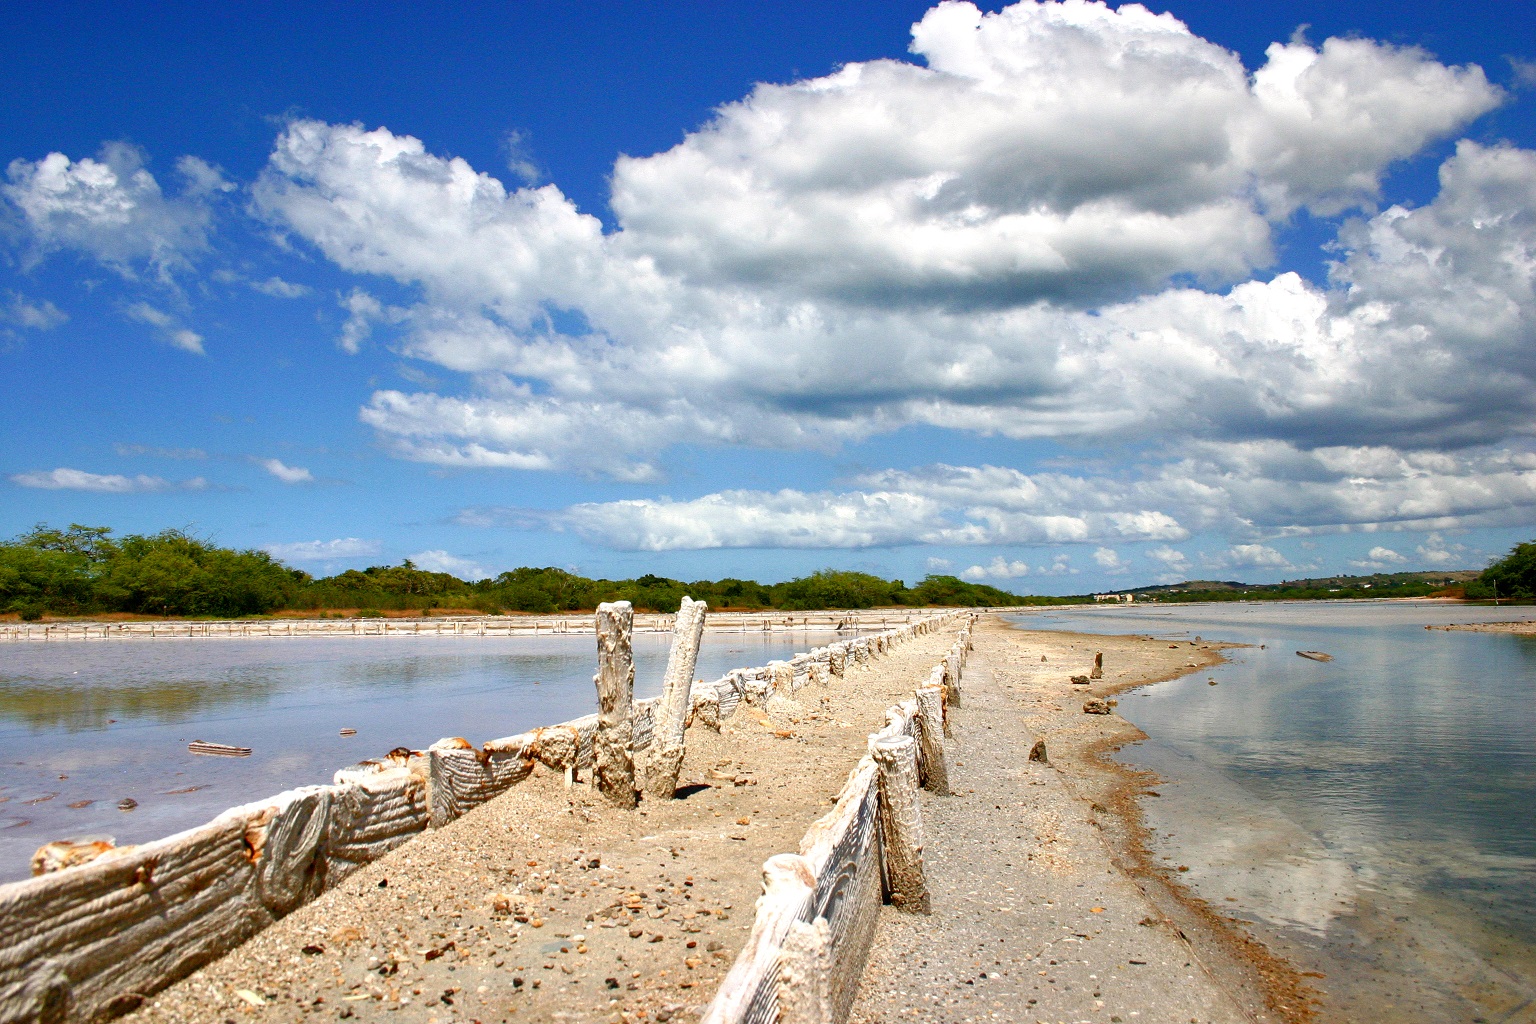 Salt flats at Cabo Rojo National Wildlife refuge in Puerto Rico. Photo by USFWS.